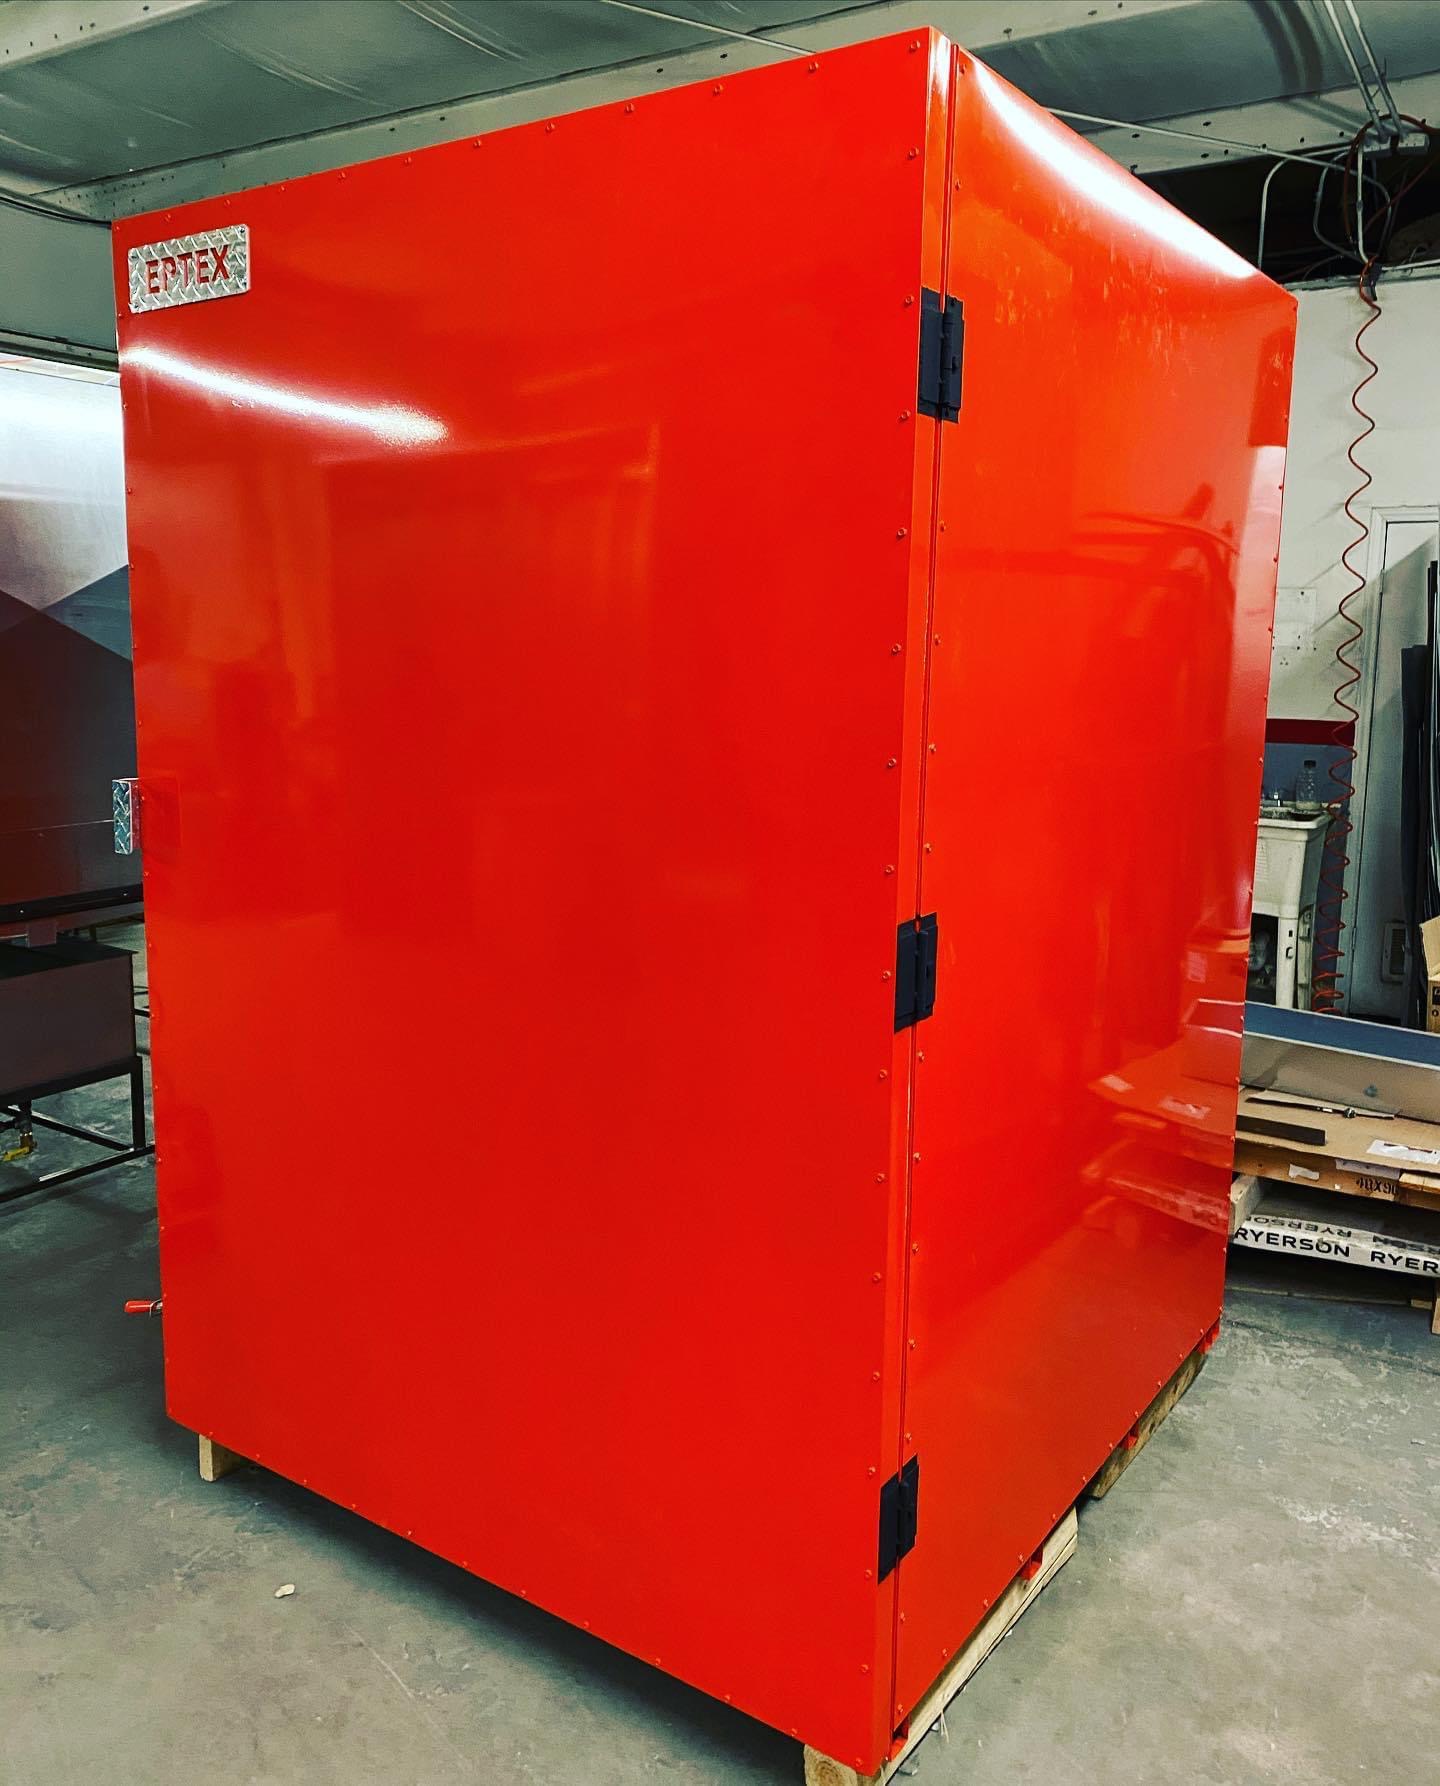 https://www.eptexcoatings.com/wp-content/uploads/2019/04/5x5x7-oven-pc-red.jpg